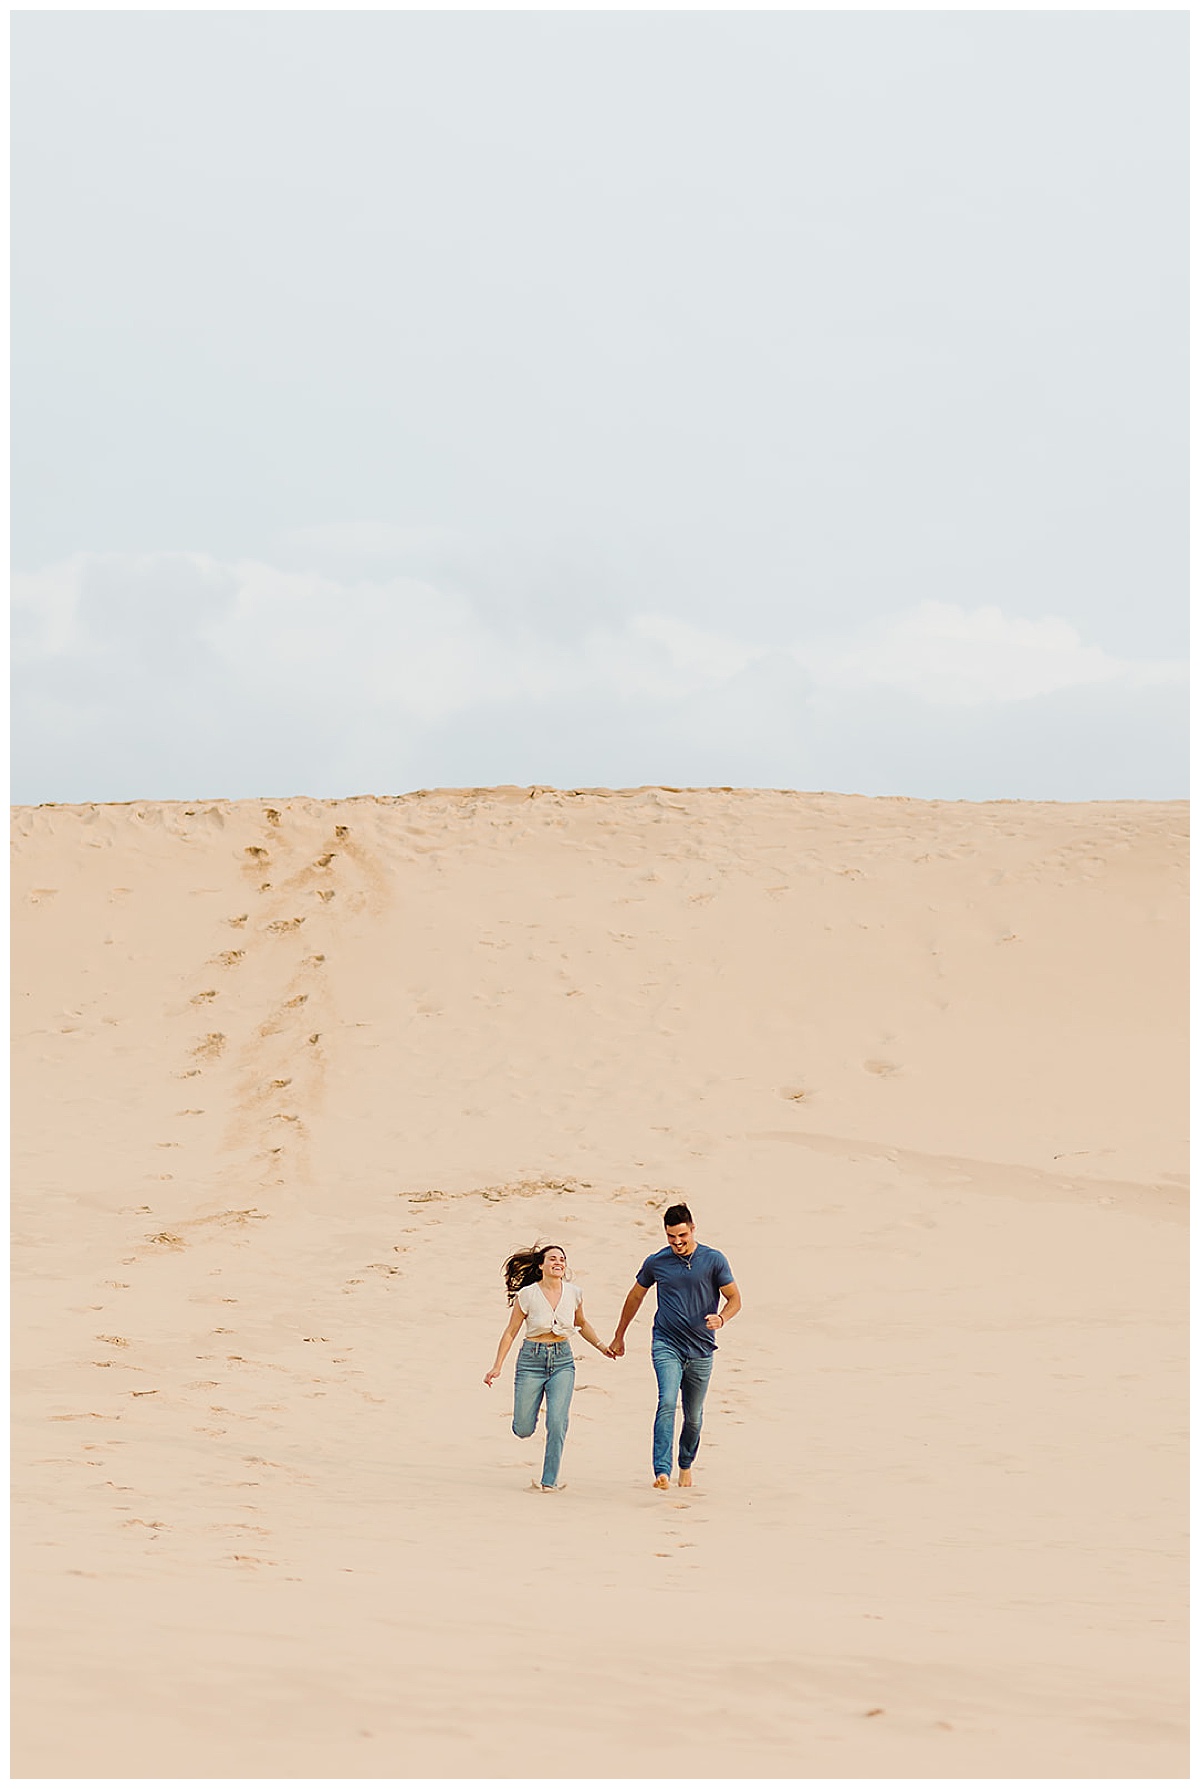 Two people run down the sand dune for Mears, MI Engagement session